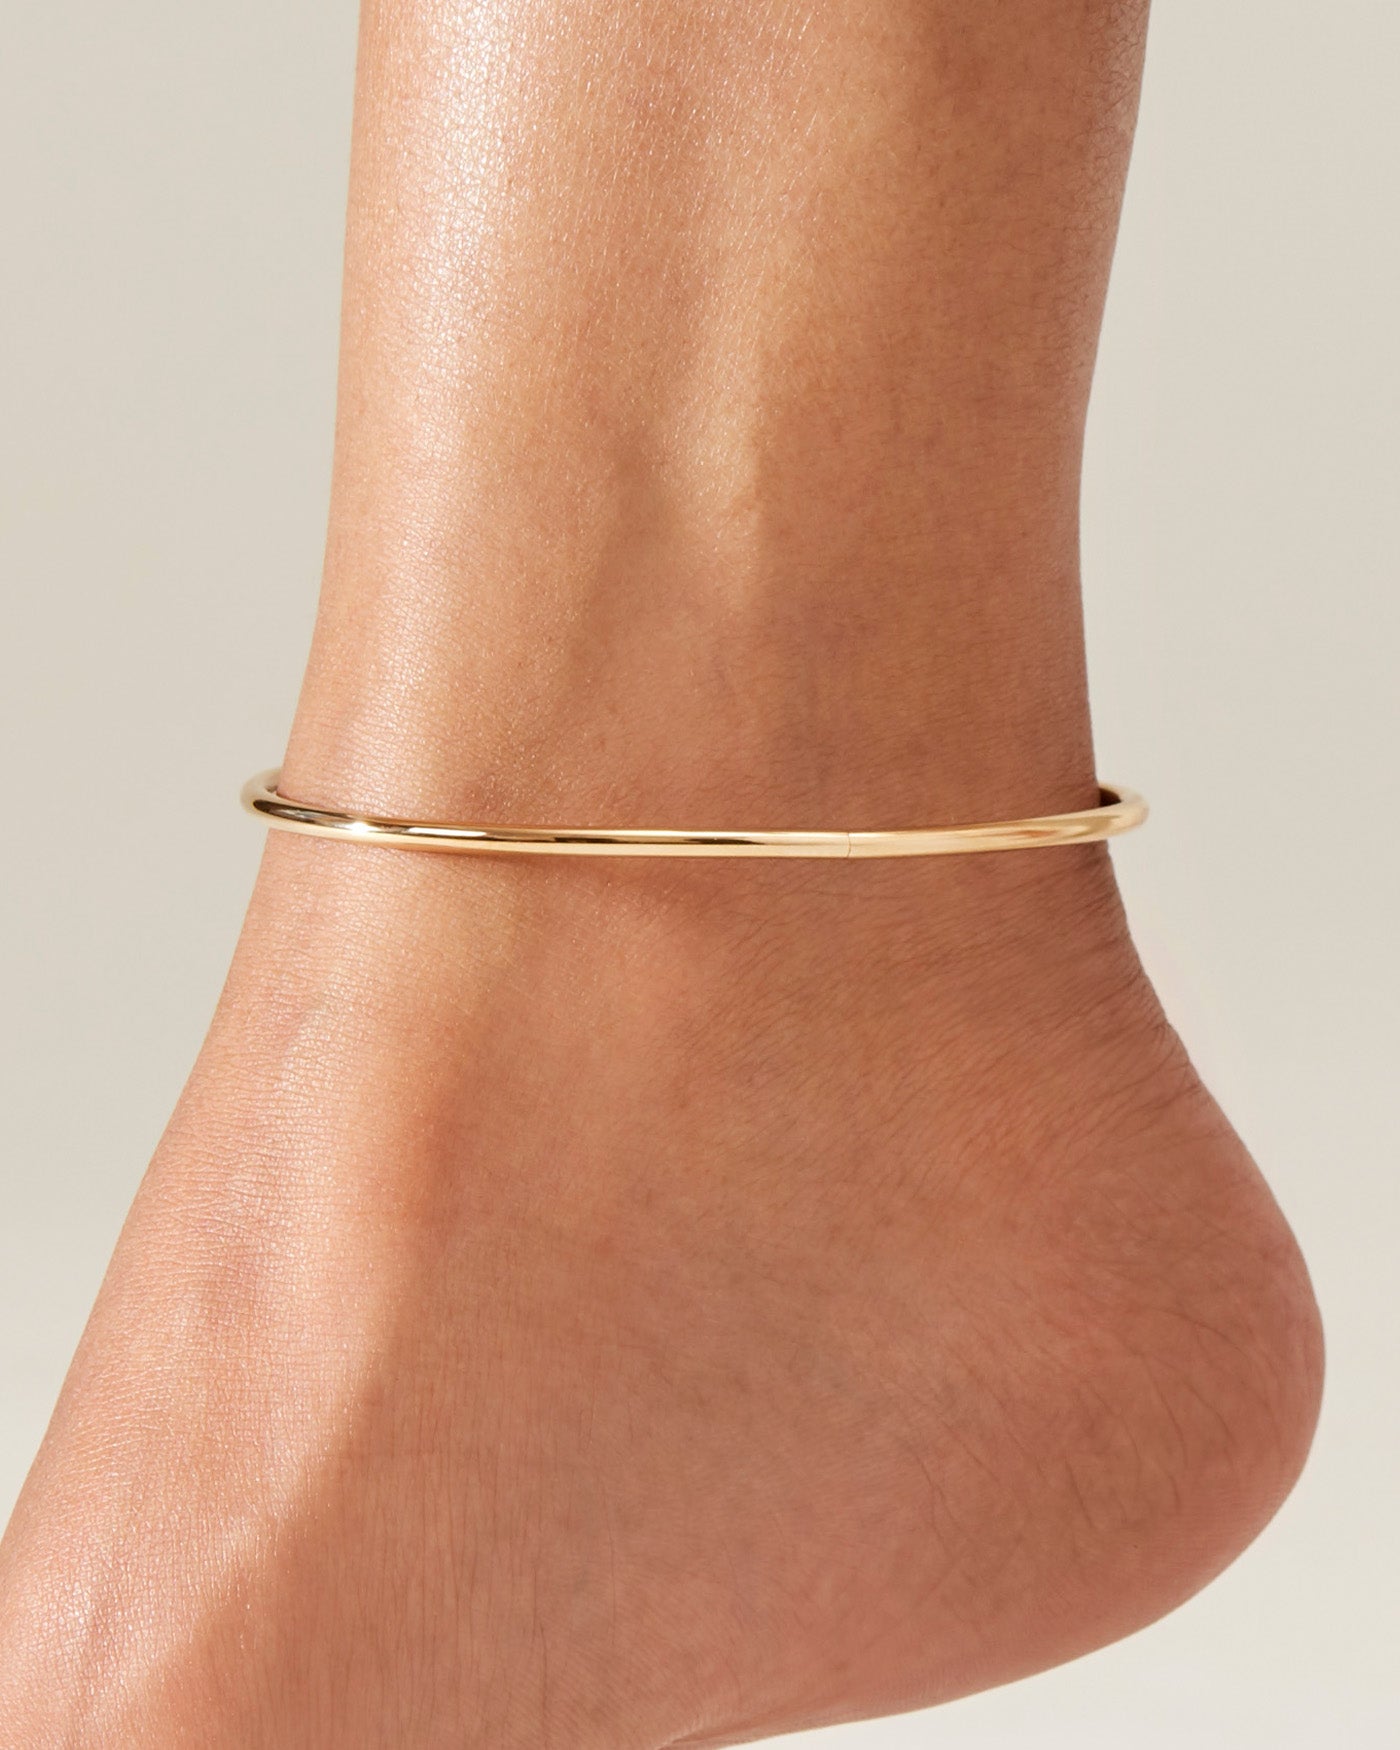 POISE DISK ANKLET - GOLD, ROSE GOLD, OR SILVER - SO PRETTY CARA COTTER